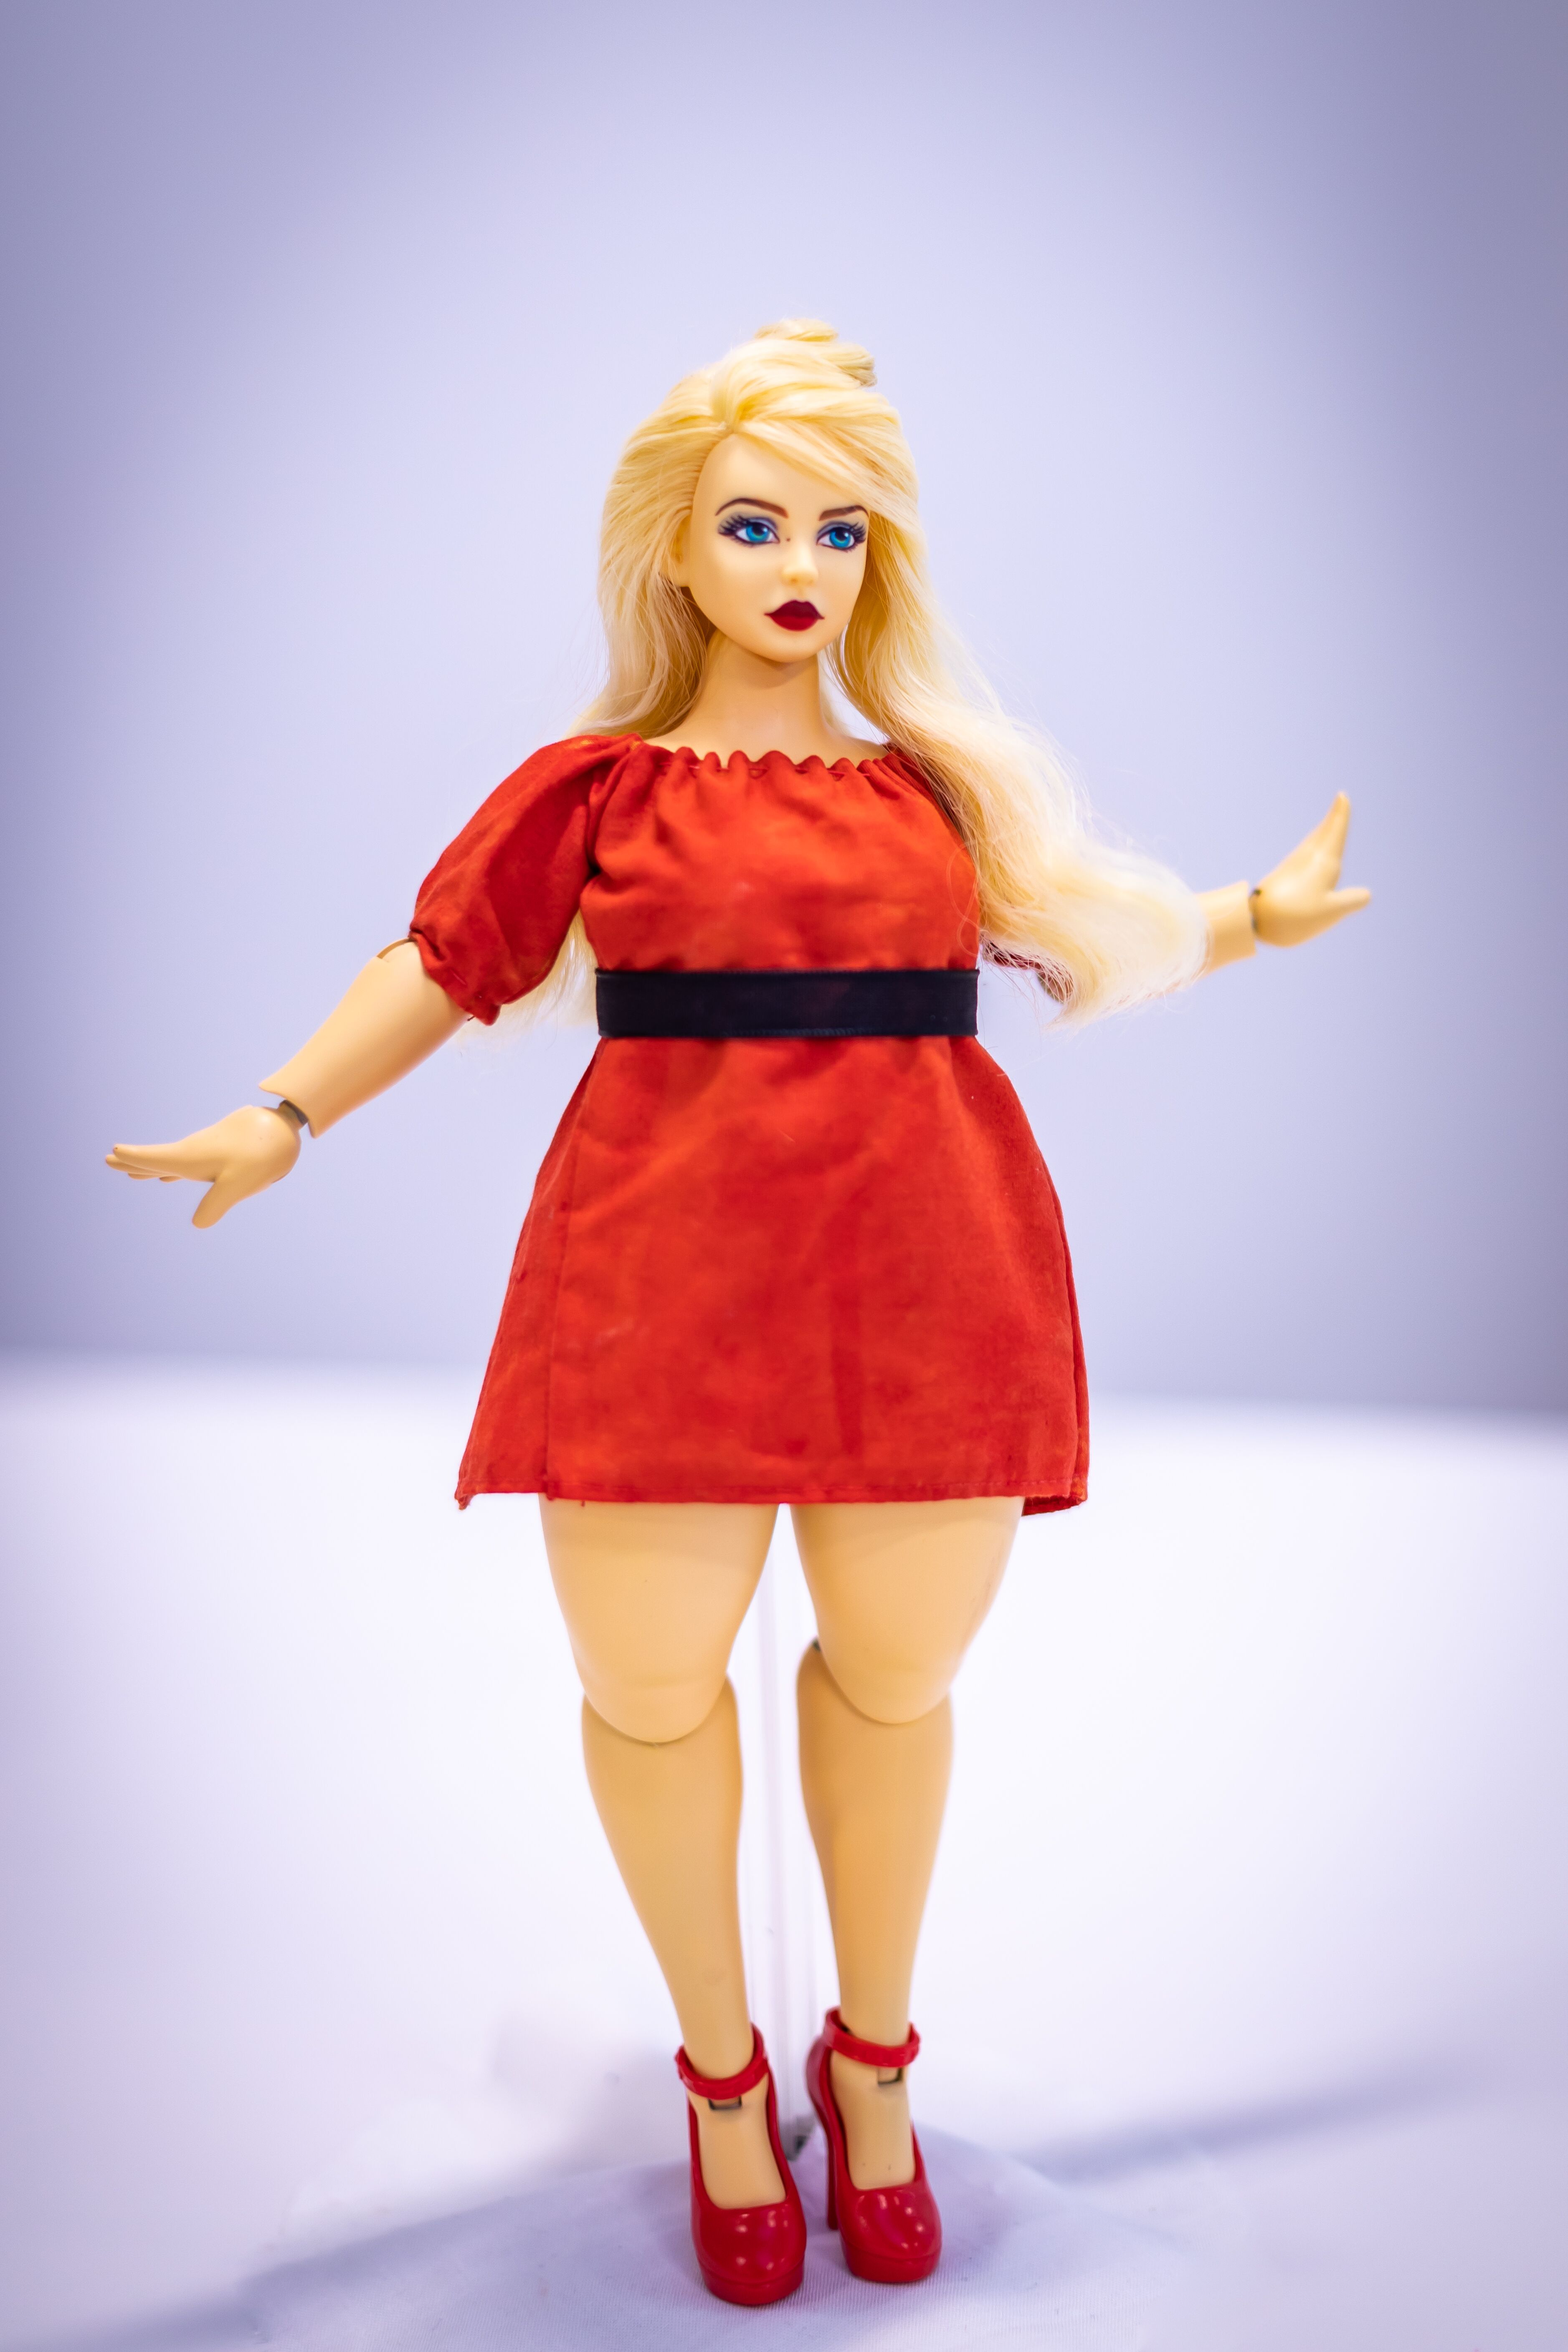 Curvy Girls Dolls Kickstarter for Plus Sized Balljoint Doll – Get the doll for just a $25 pledge!